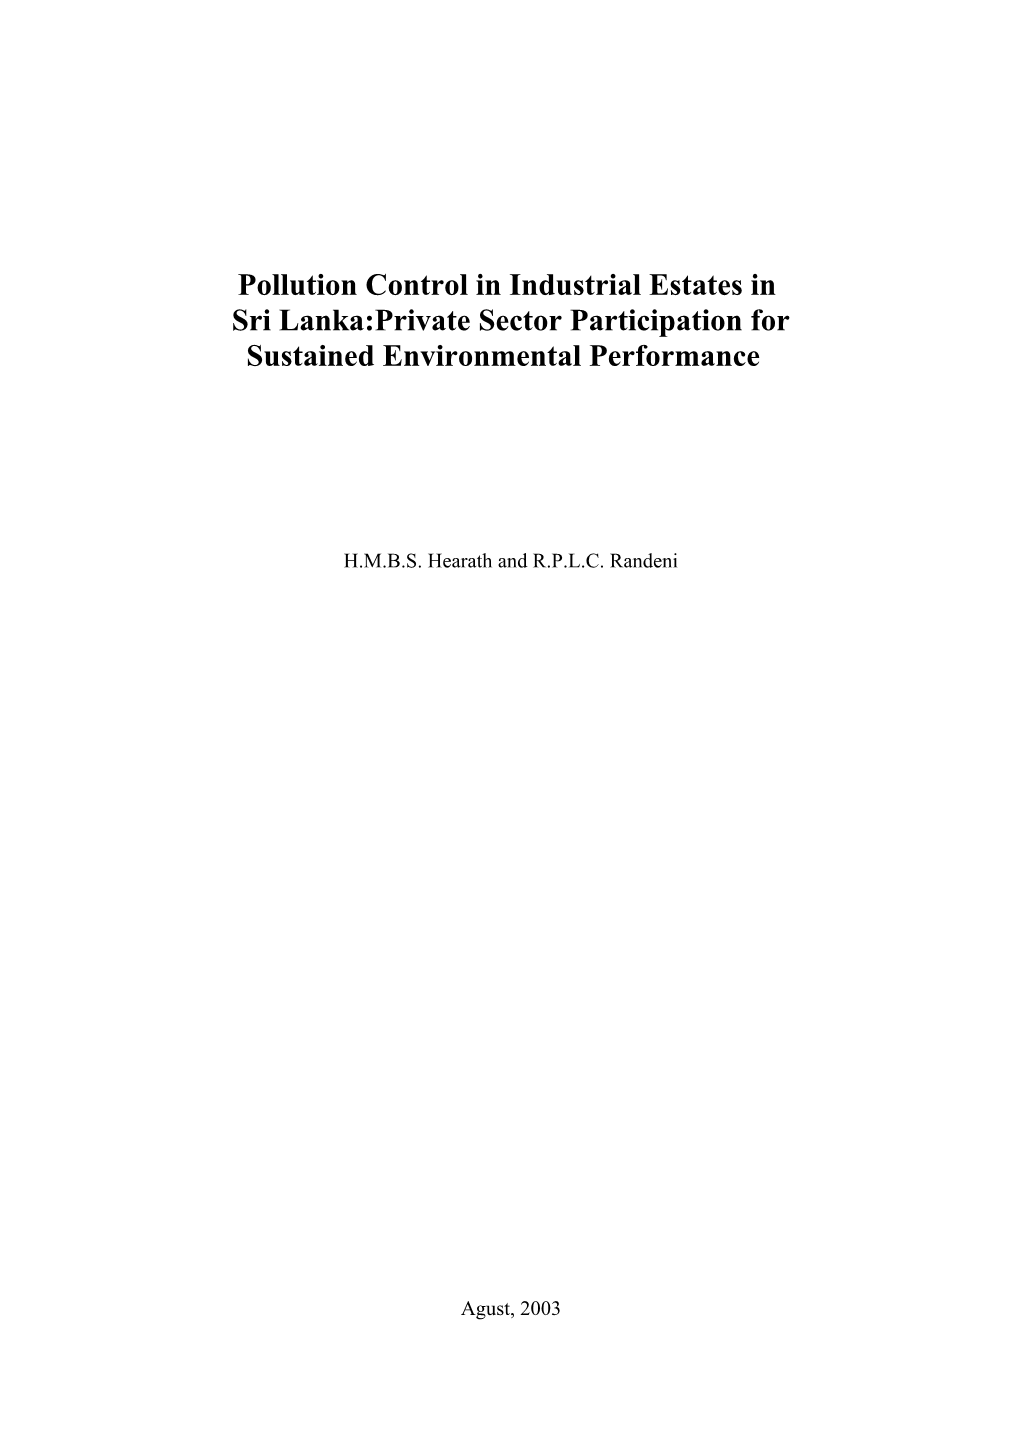 Title: Econometric Analysis of the Causes of Forest Land Use Changes